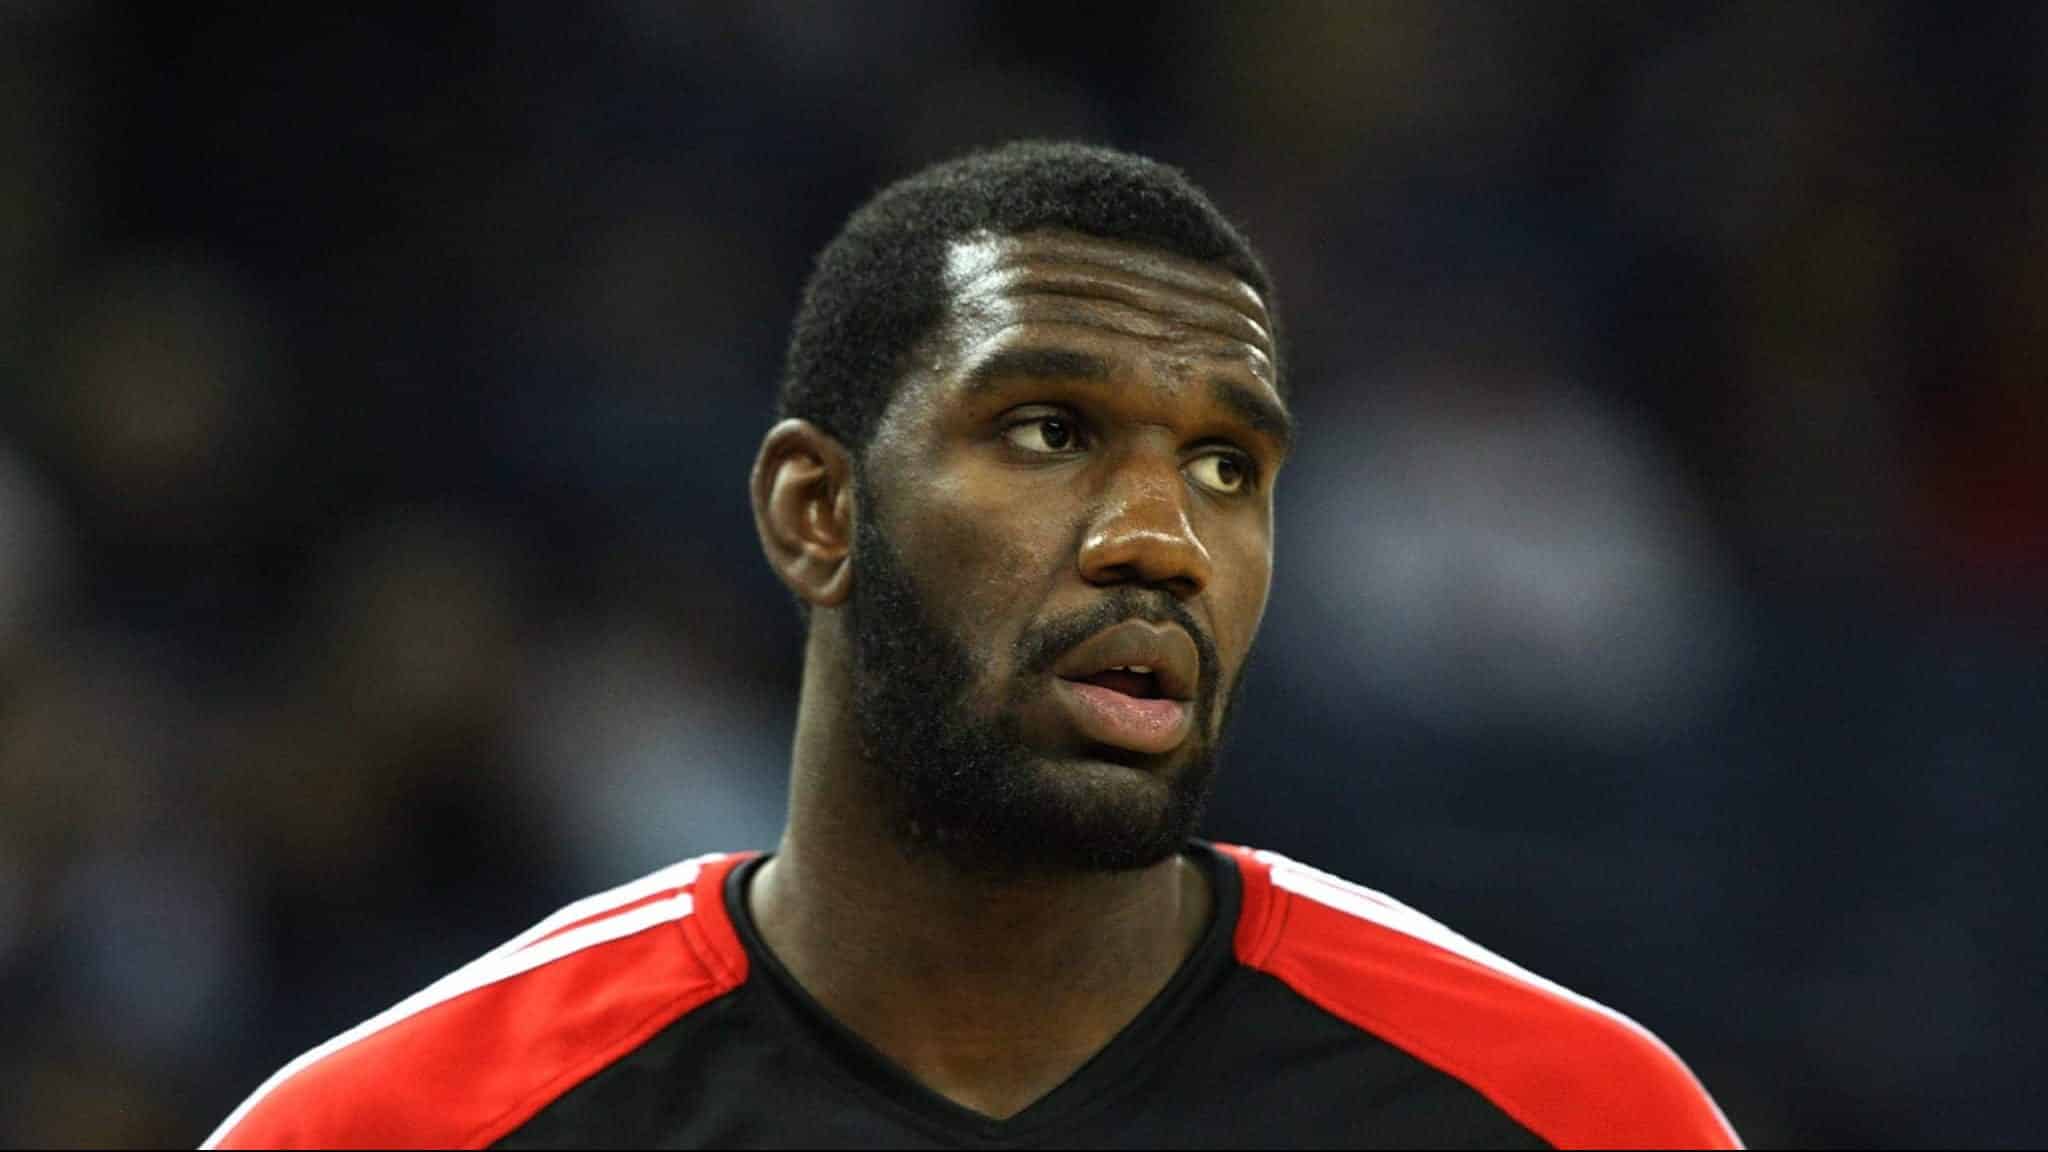 OAKLAND, CA - NOVEMBER 20: Greg Oden #52 of the Portland Trail Blazers looks on against the Golden State Warriors during an NBA game at Oracle Arena on November 20, 2009 in Oakland, California.